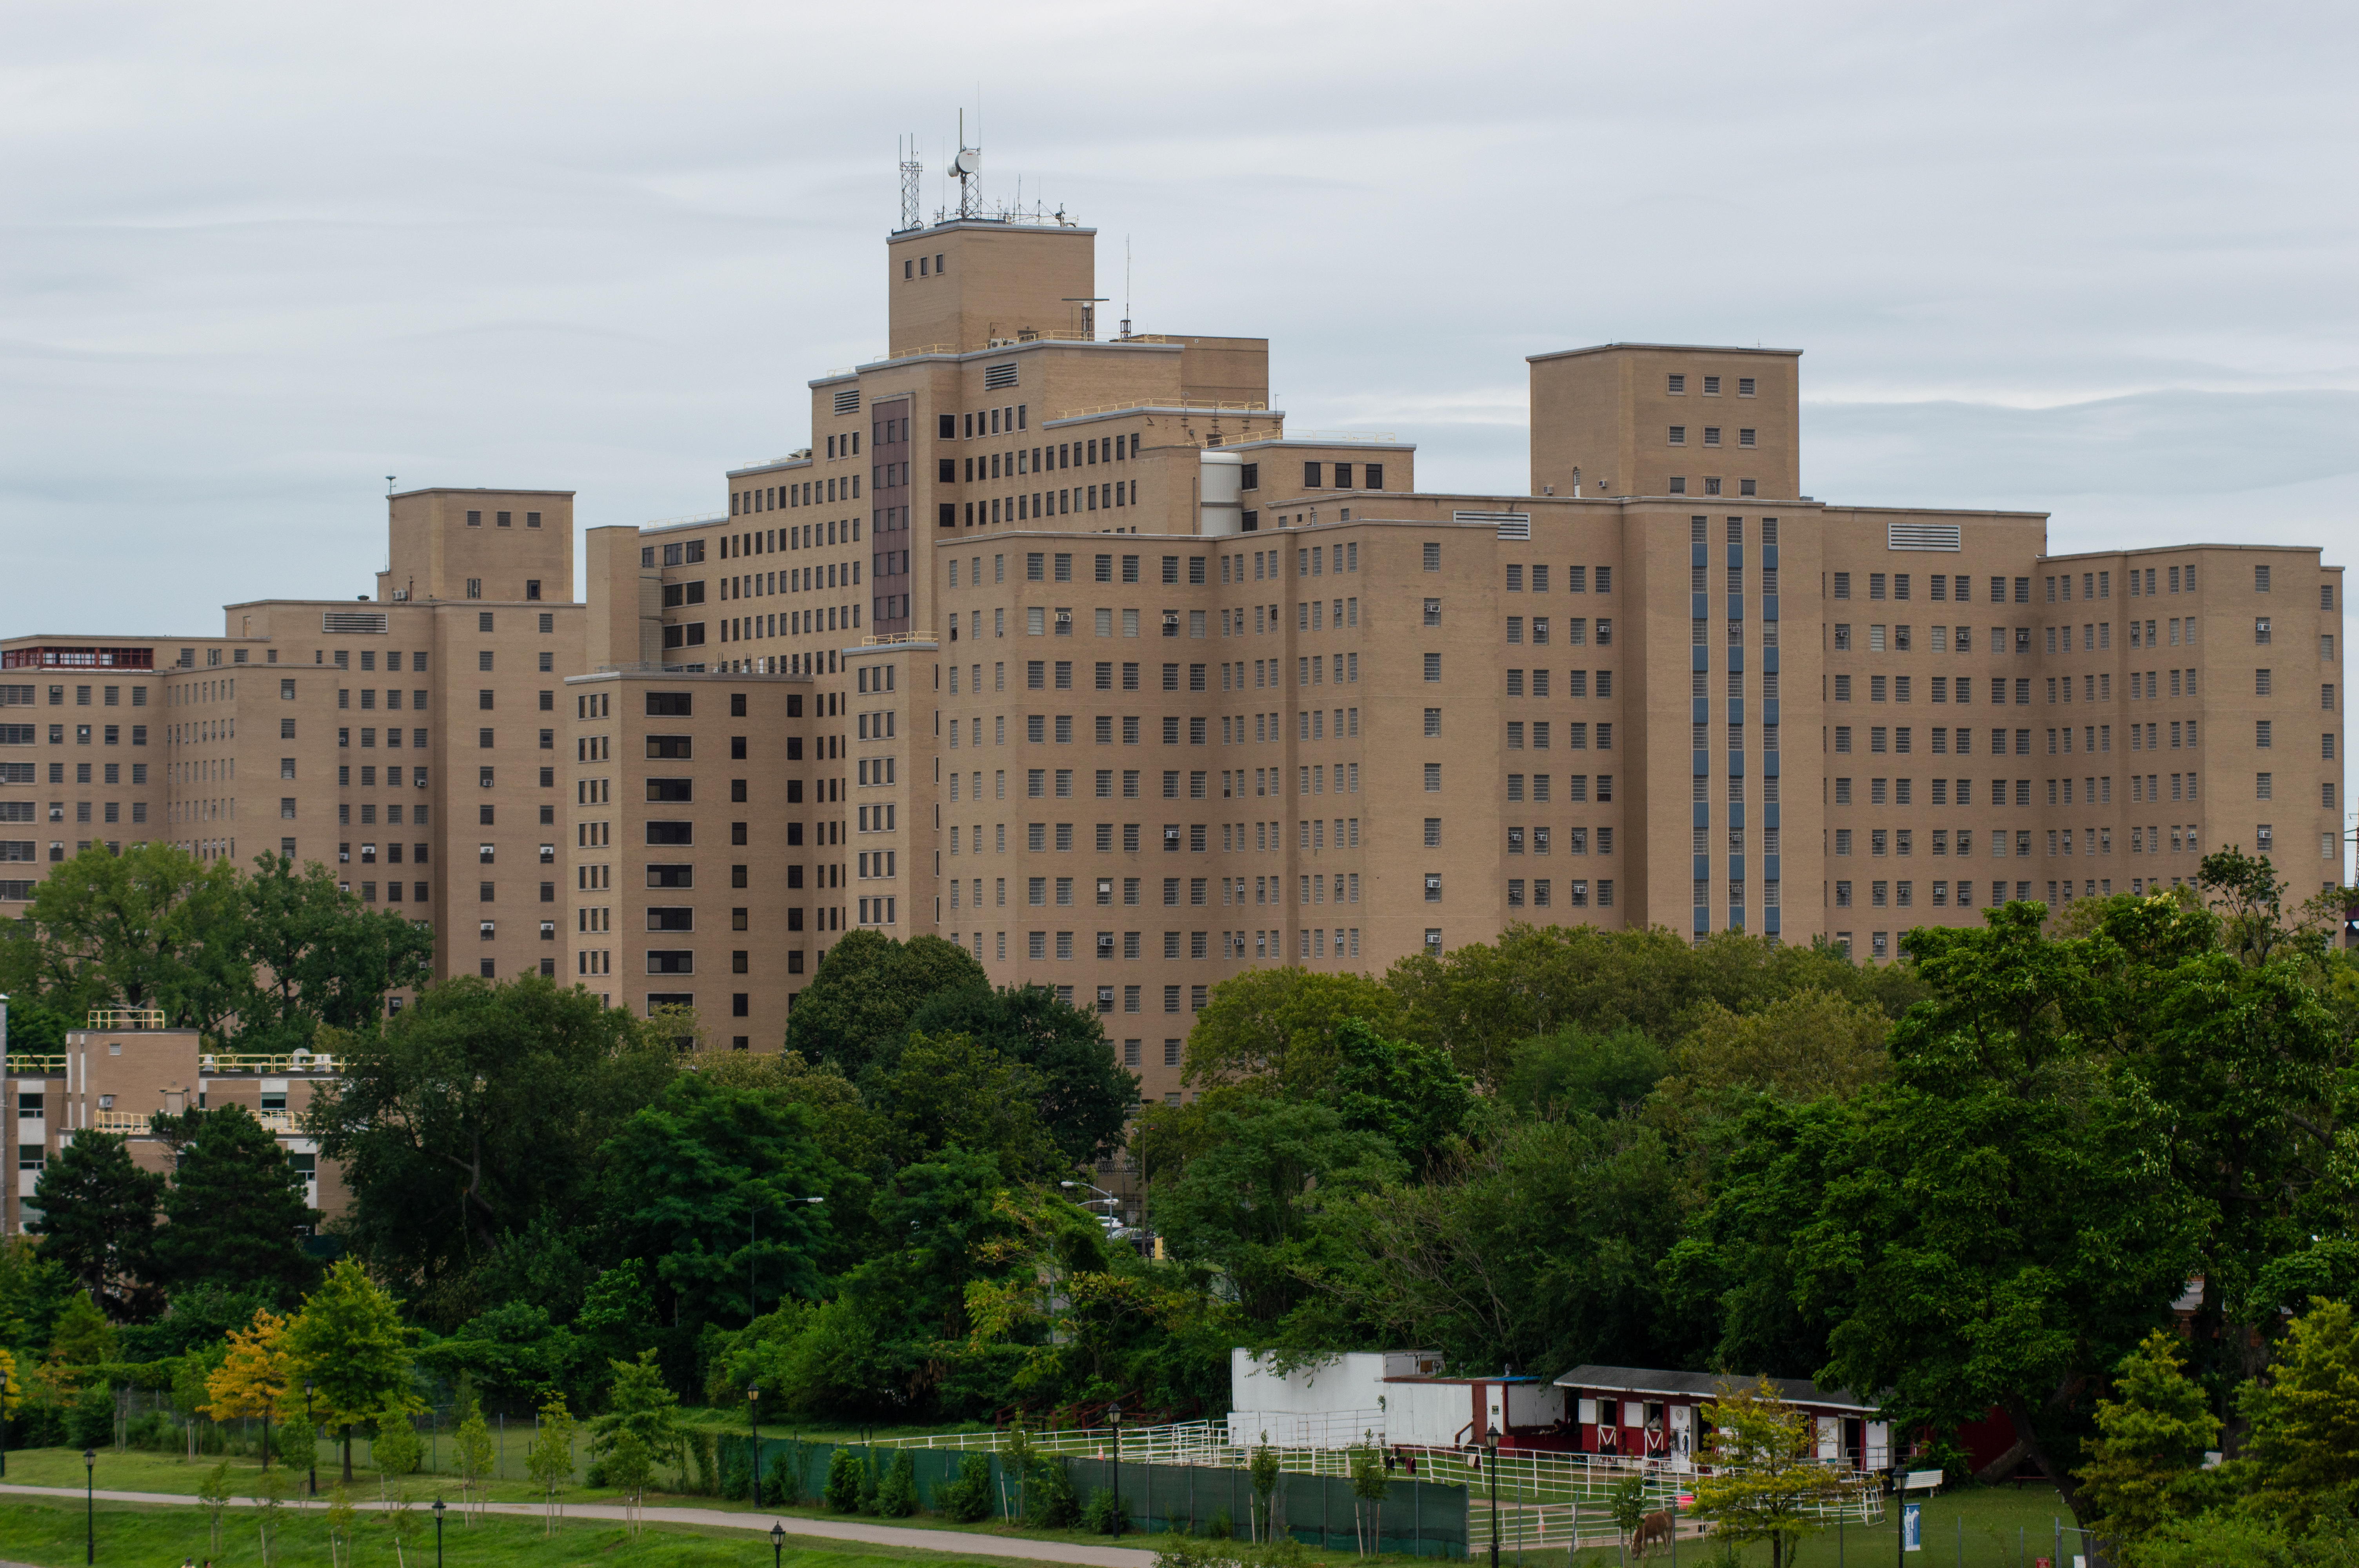 A large complex of buildings on Randall's Island in New York City.